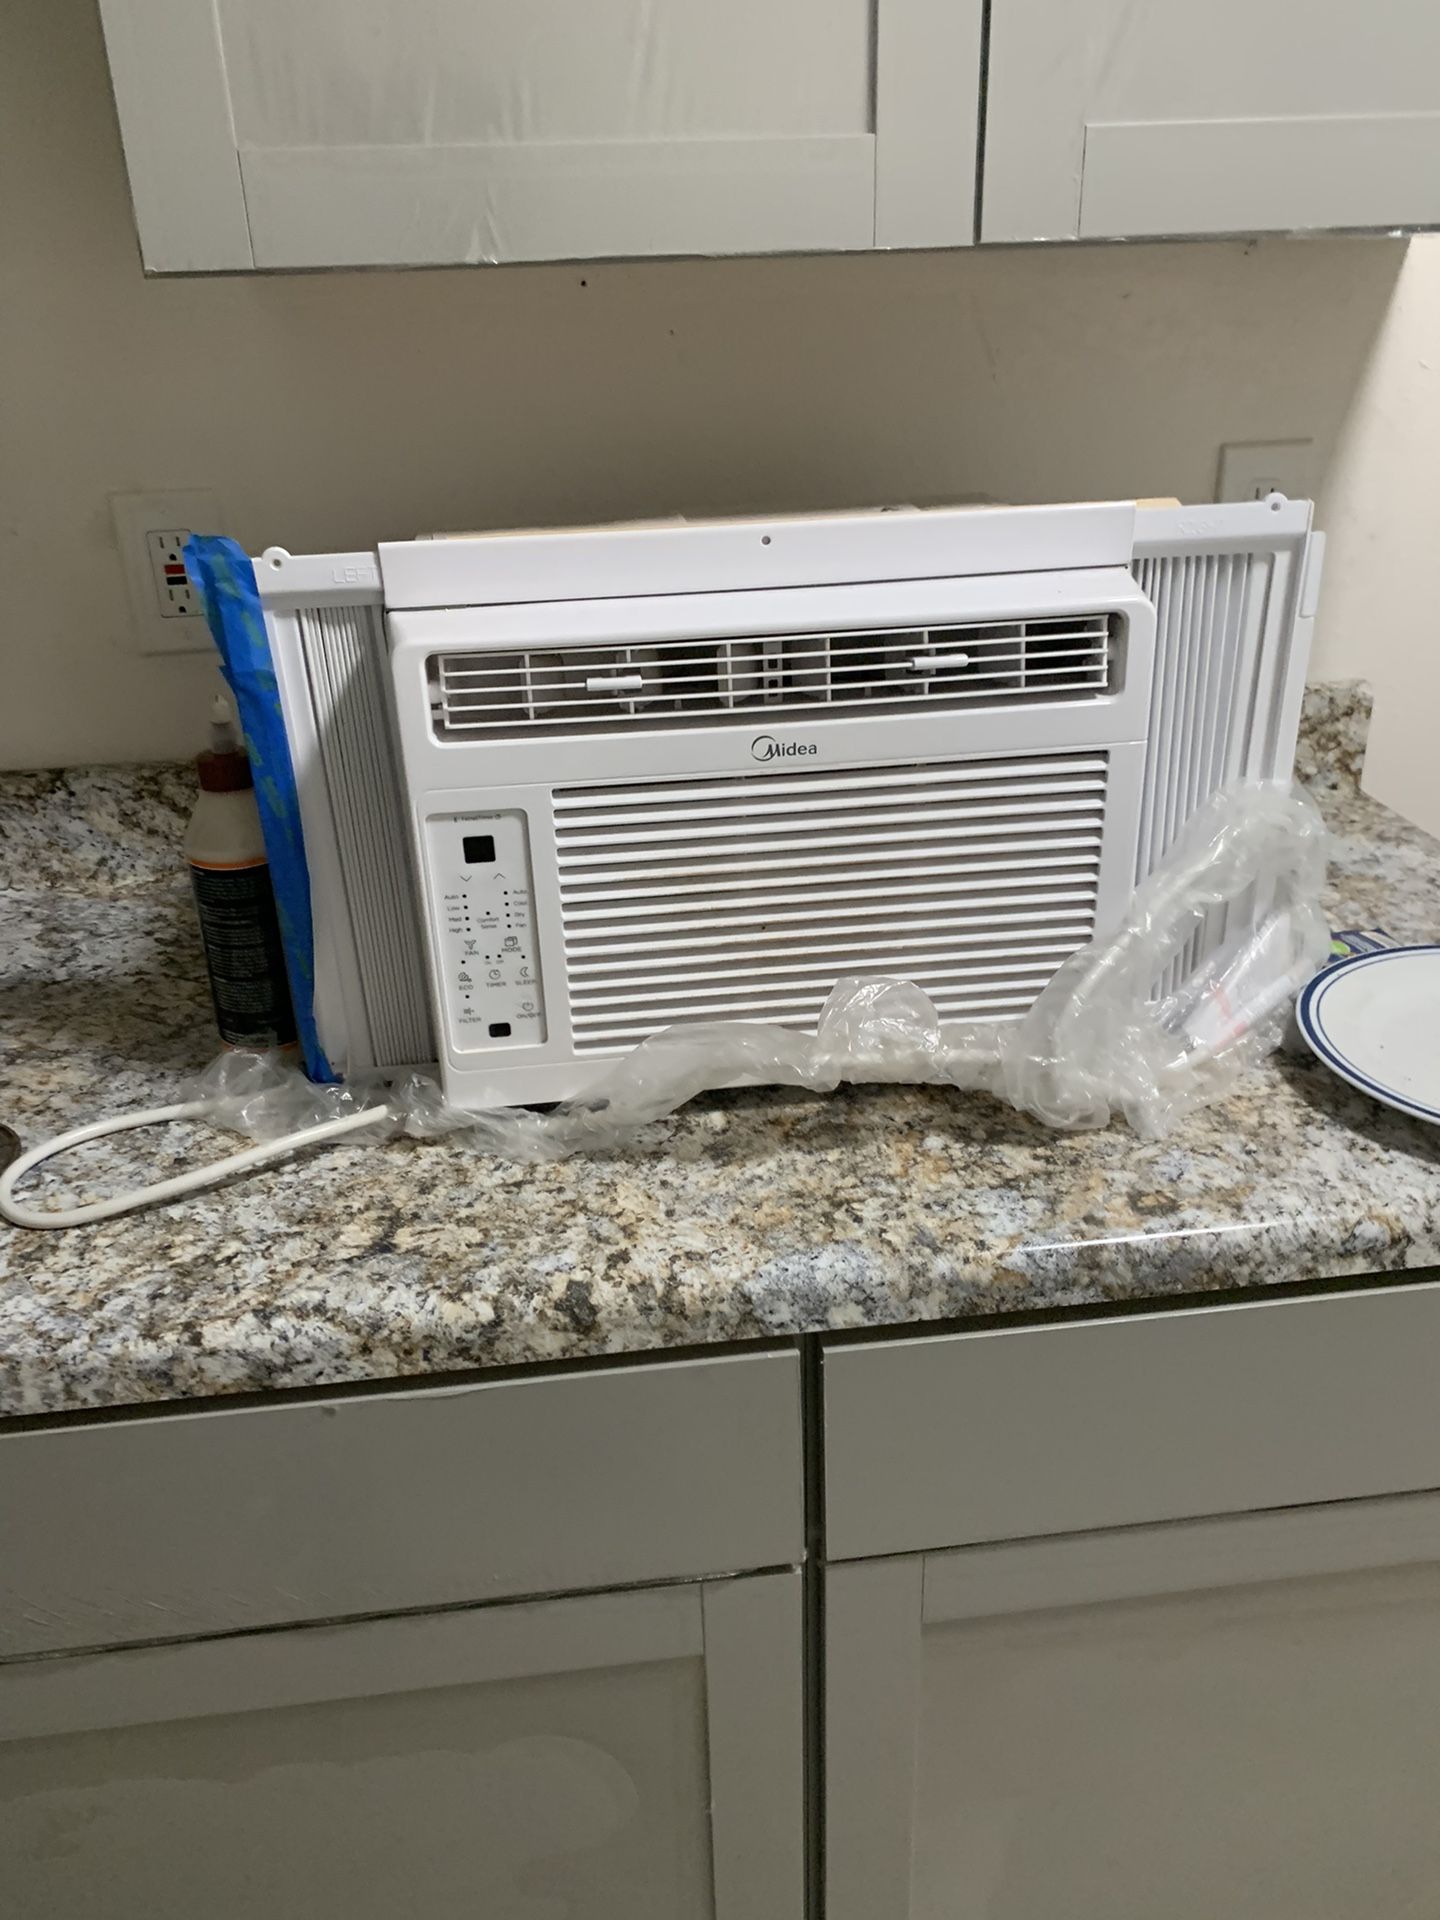 2 A/c Window Unit With Remotes. $100. $50 For 1